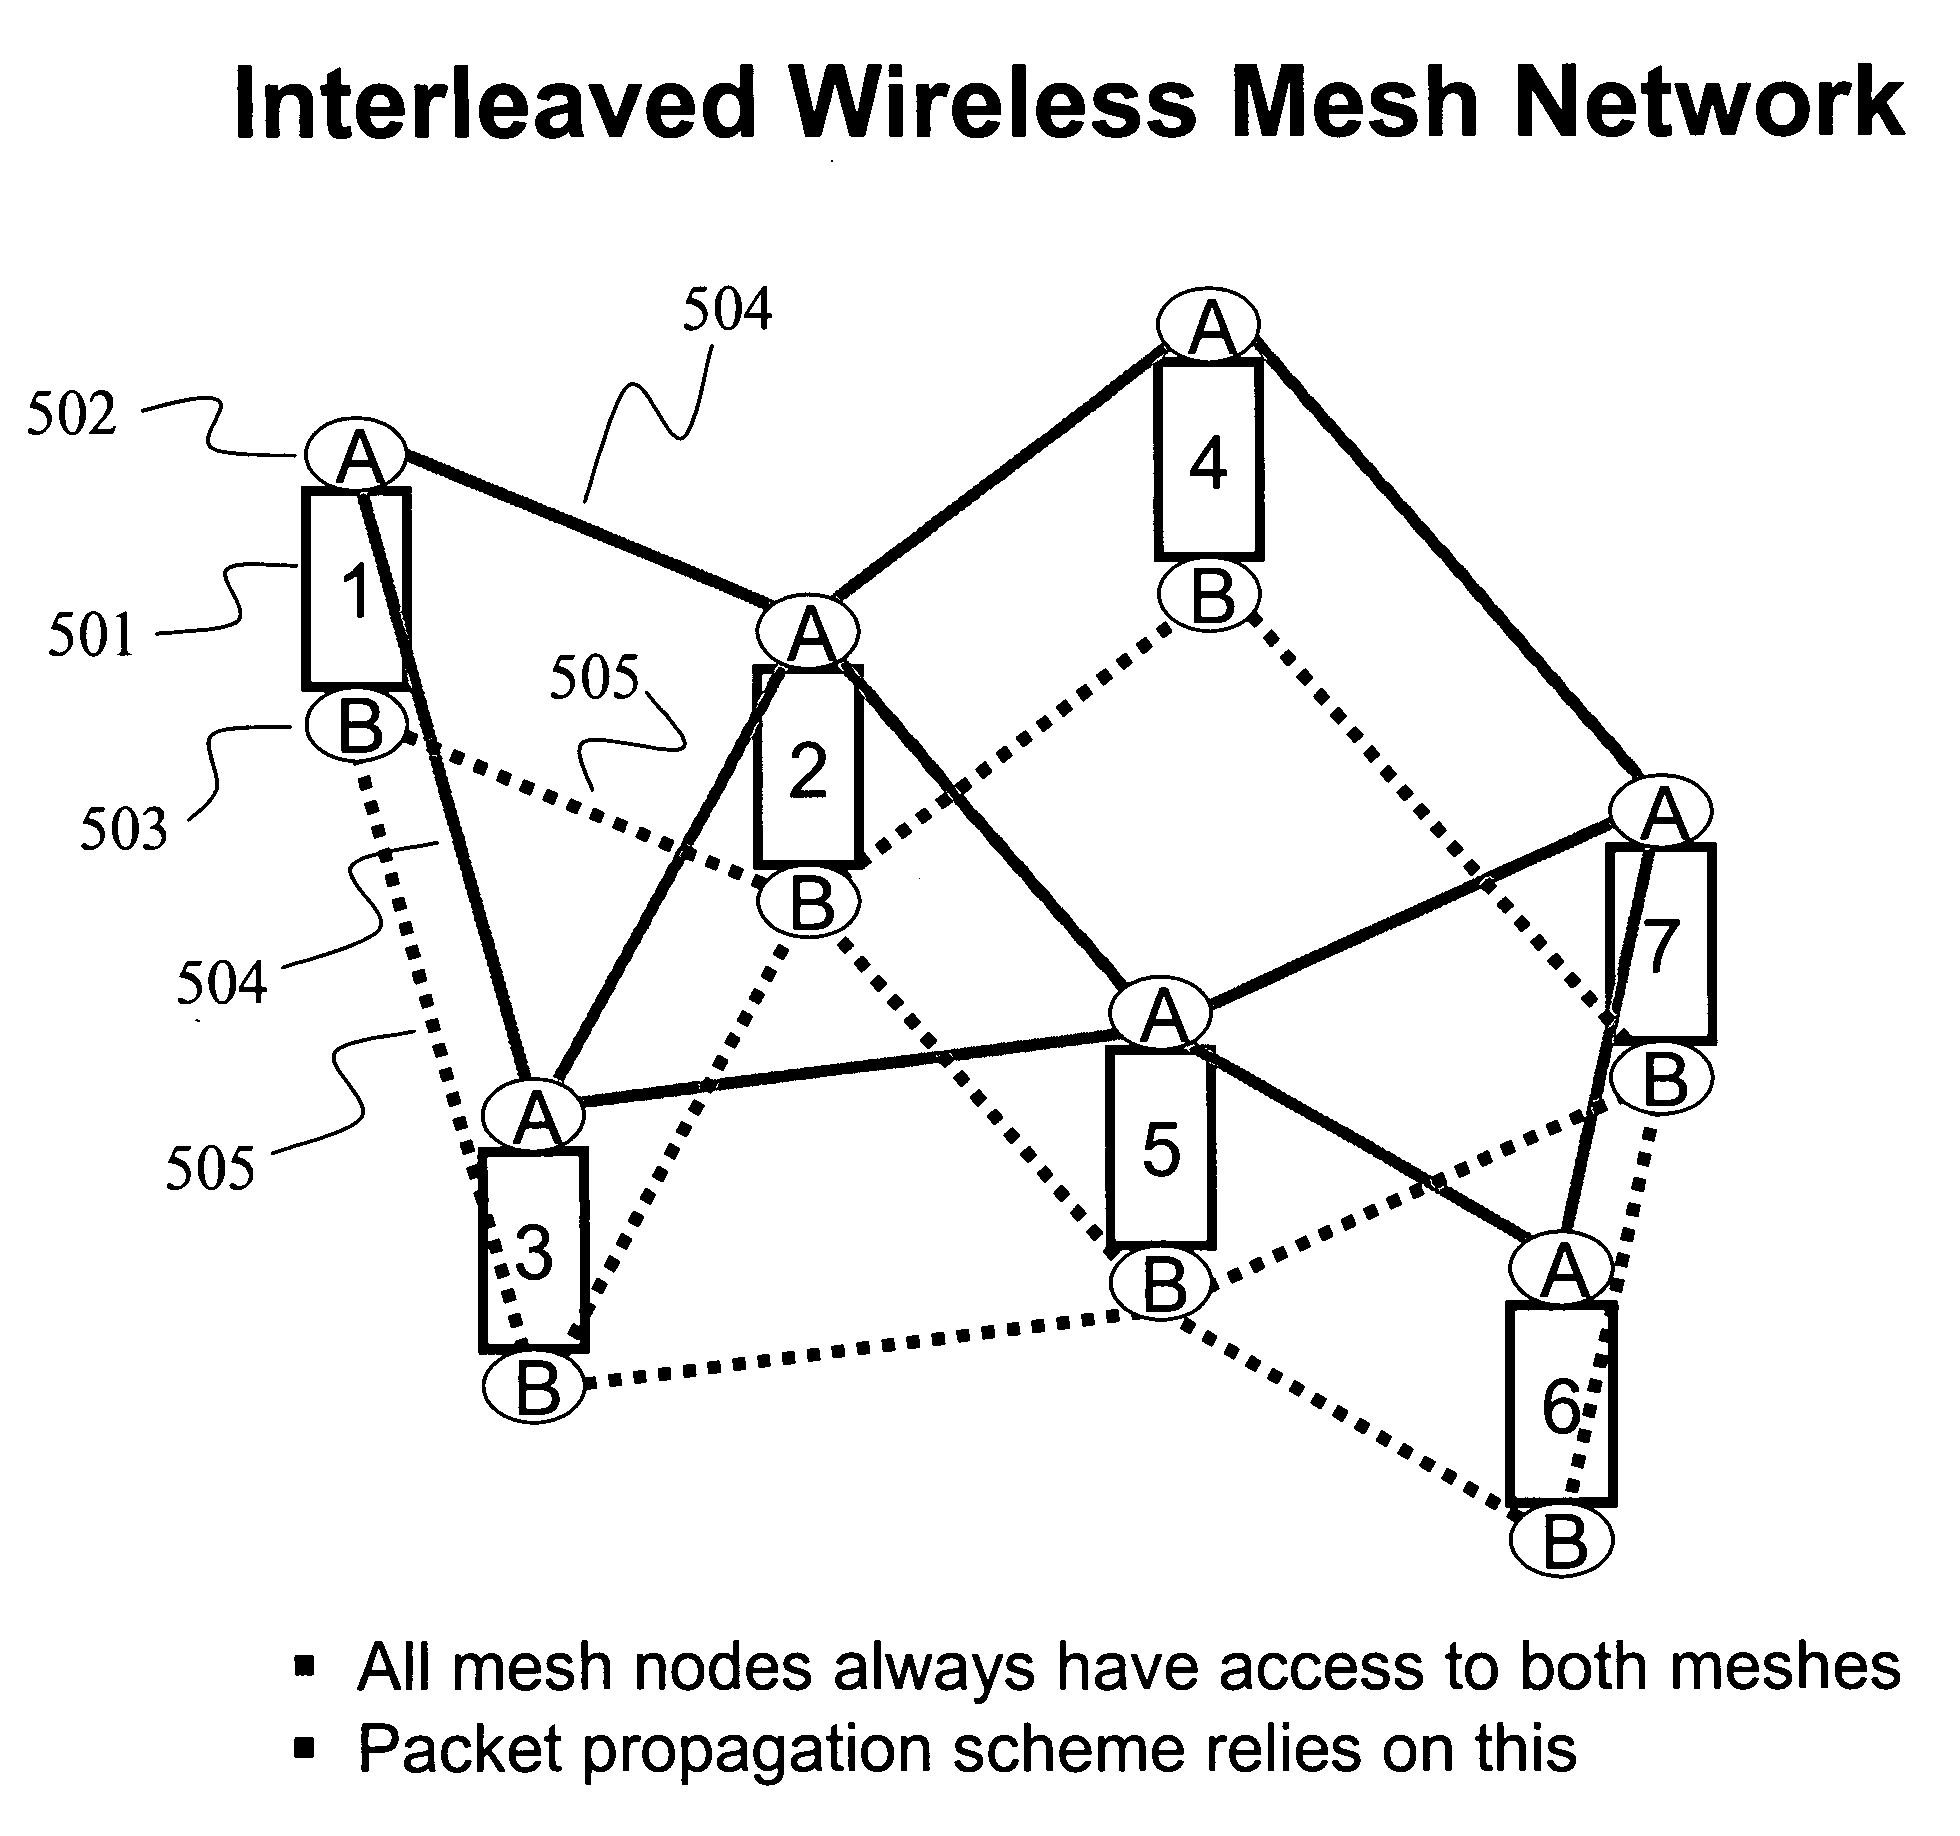 Interleaved and directional wireless mesh network